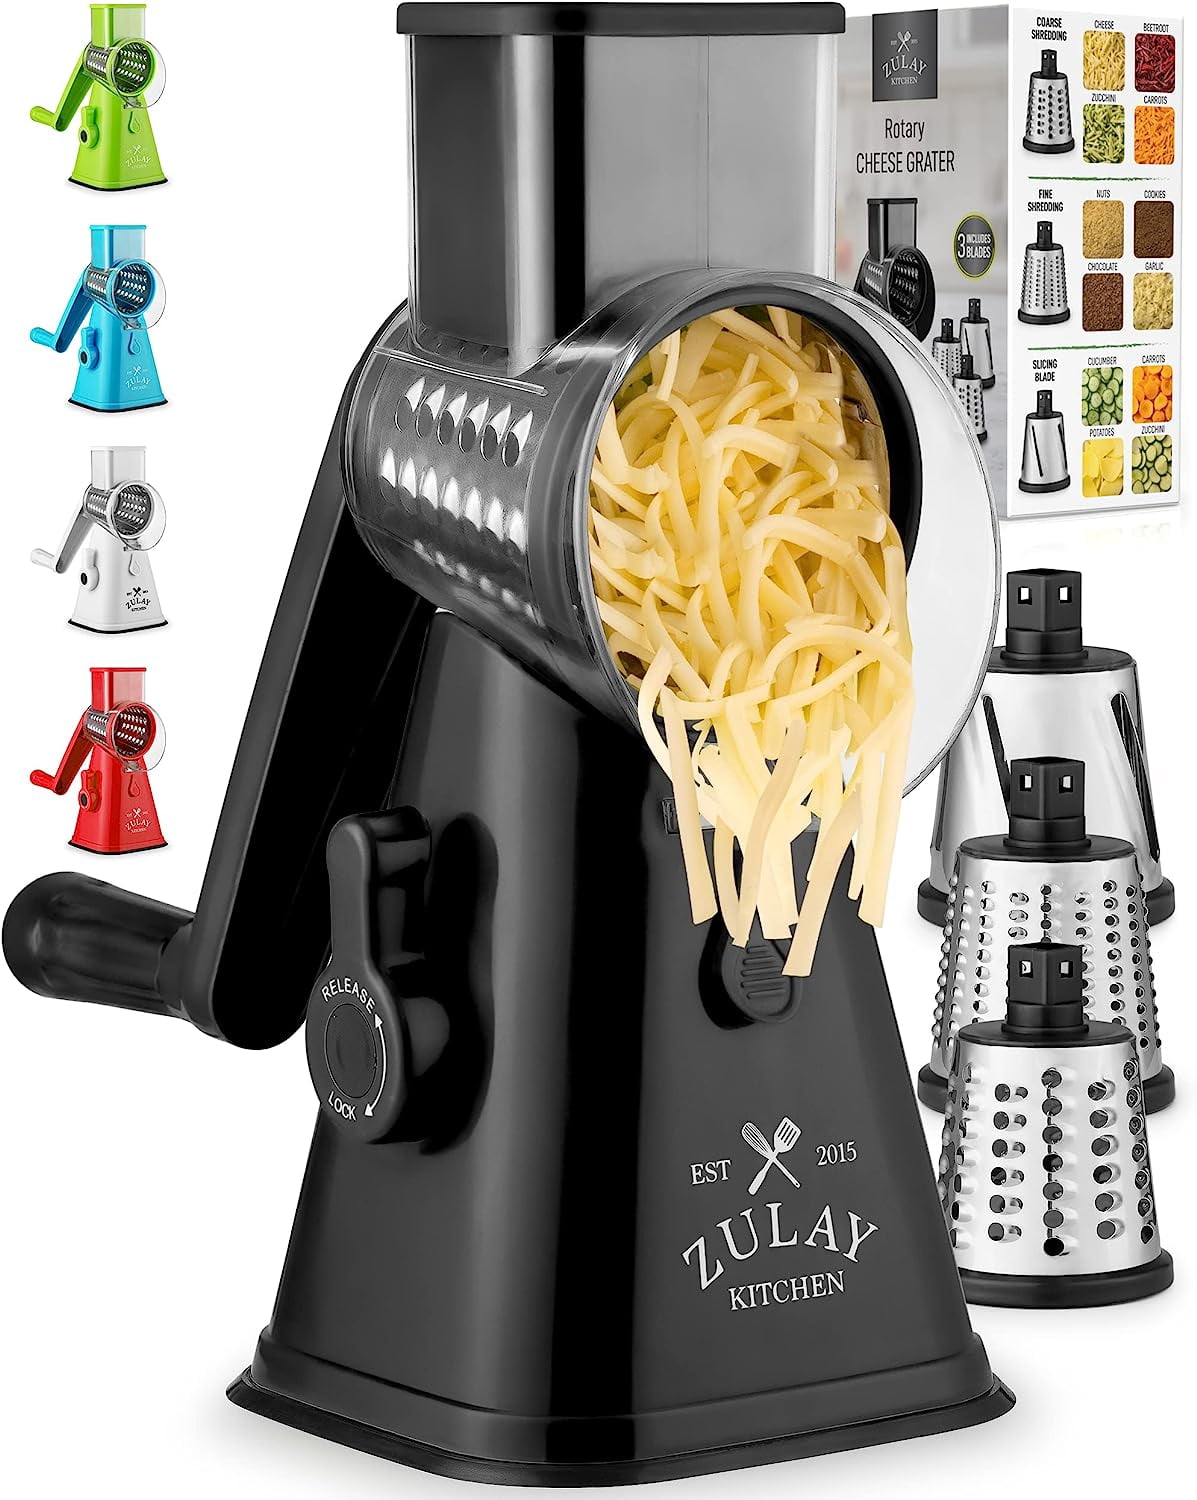 Zulay Kitchen Manual Rotary Cheese Grater with Handle - White, 1 - Foods Co.